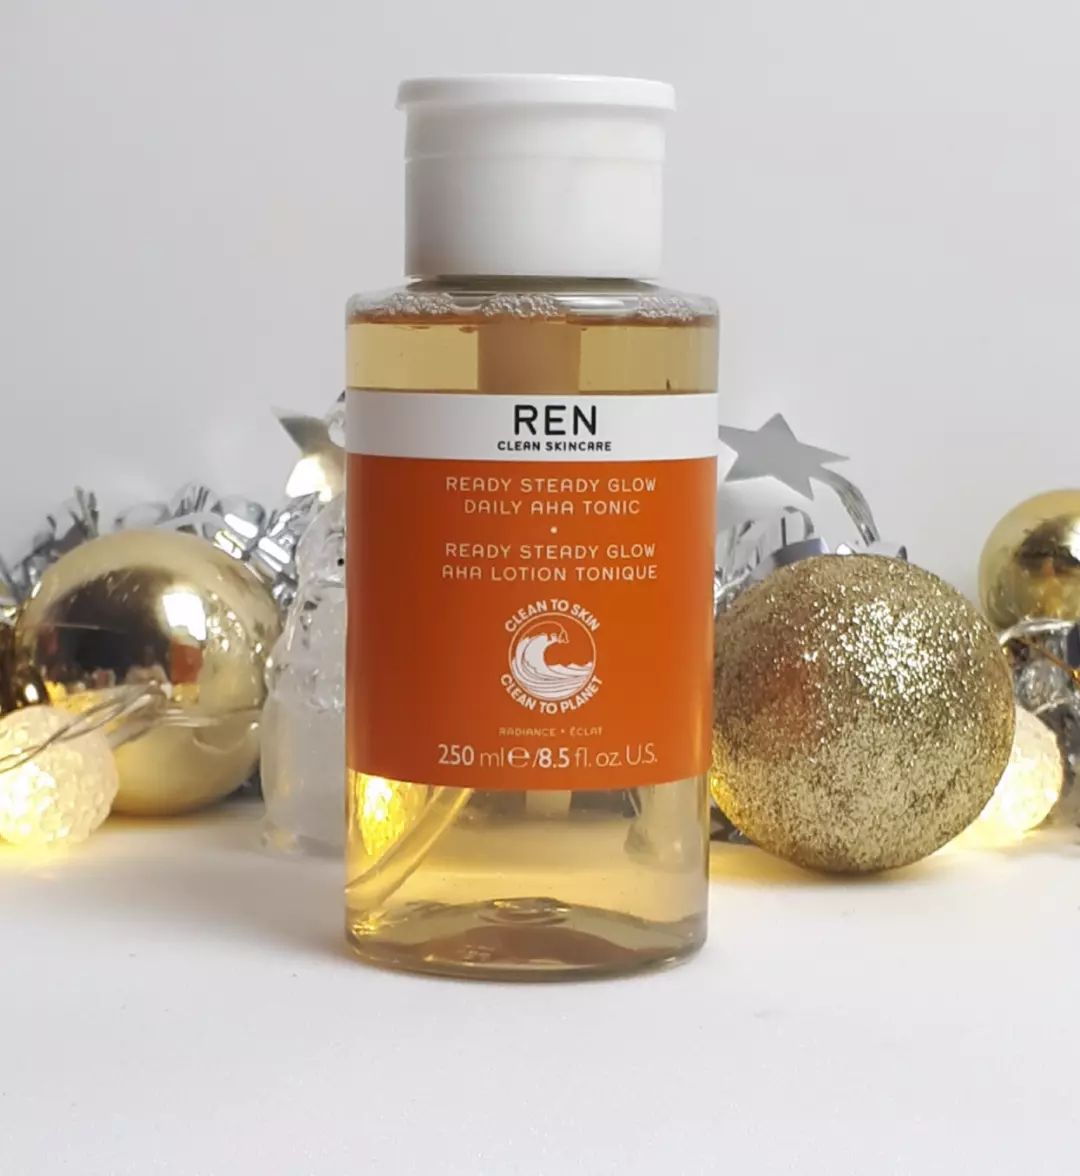 A few weeks ago I was lucky enough to win one of Sharon @backtoyoubeauty #giveaways. One of the products in my wonderful prize was this @renskincare Ready Steady Glow Daily AHA Tonic. Oh boy it's rather gorgeous! With lactic acid from cane sugar for smoothing the skin, salicin from willow bark for pore refining, there's olives in there too, for radiance. Do you know what? It does what it says on the bottle! 